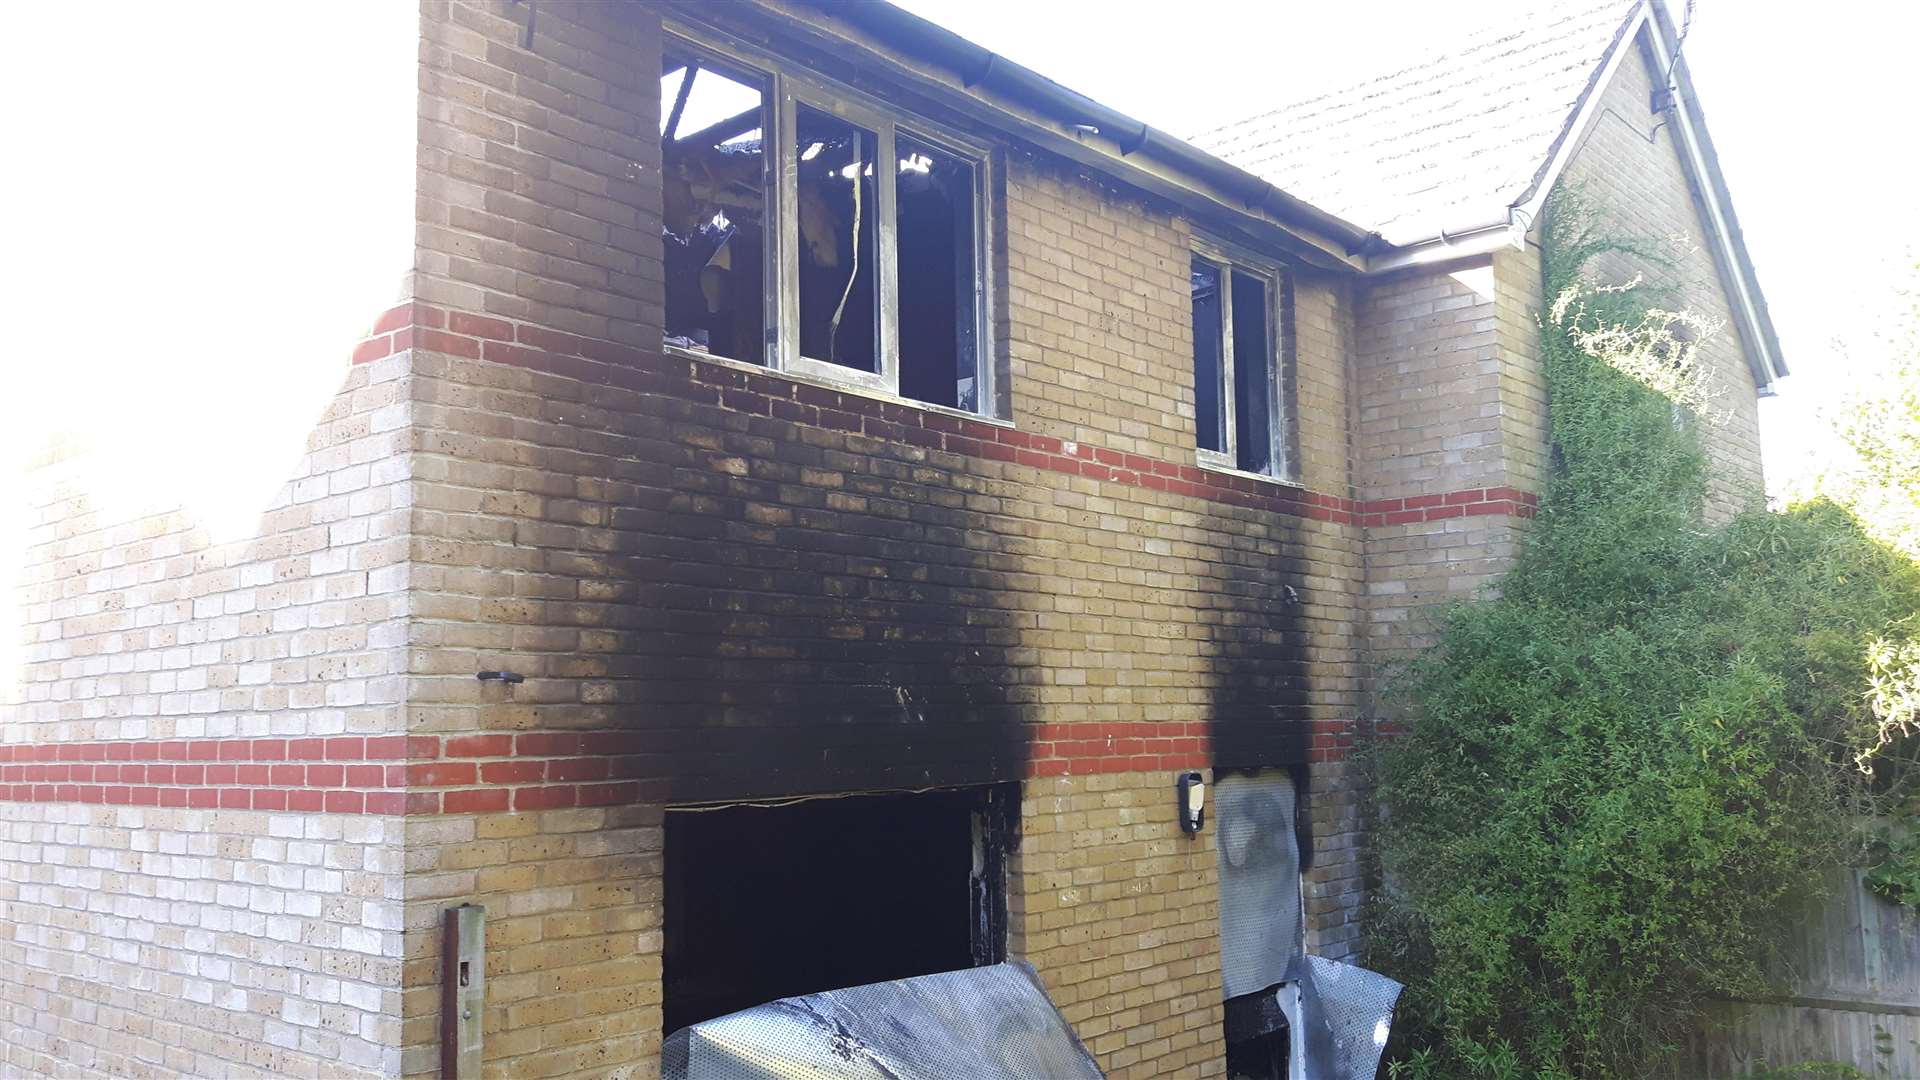 The third arson attack at Randolph Road last August.